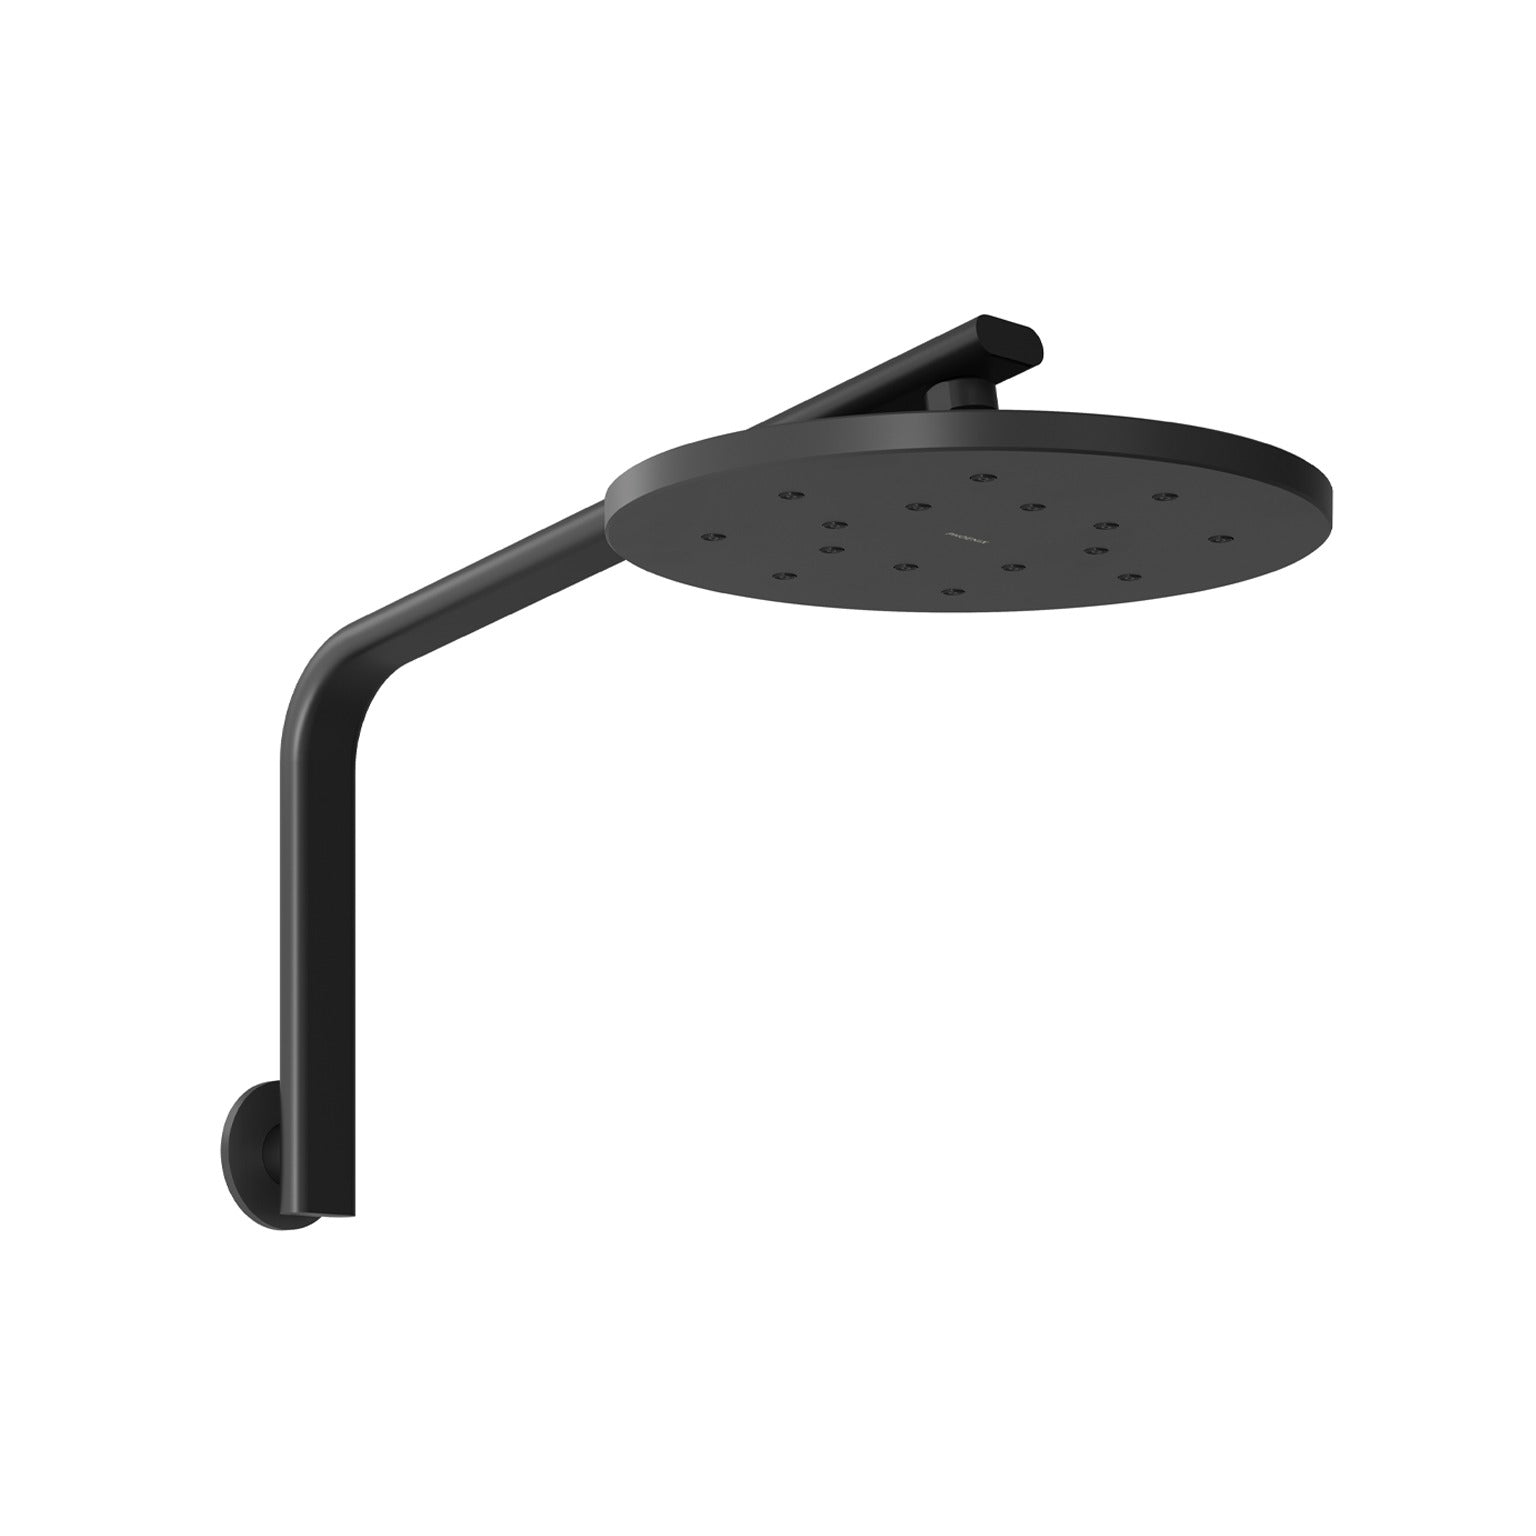 PHOENIX OXLEY HIGH-RISE SHOWER ARM AND ROSE MATTE BLACK